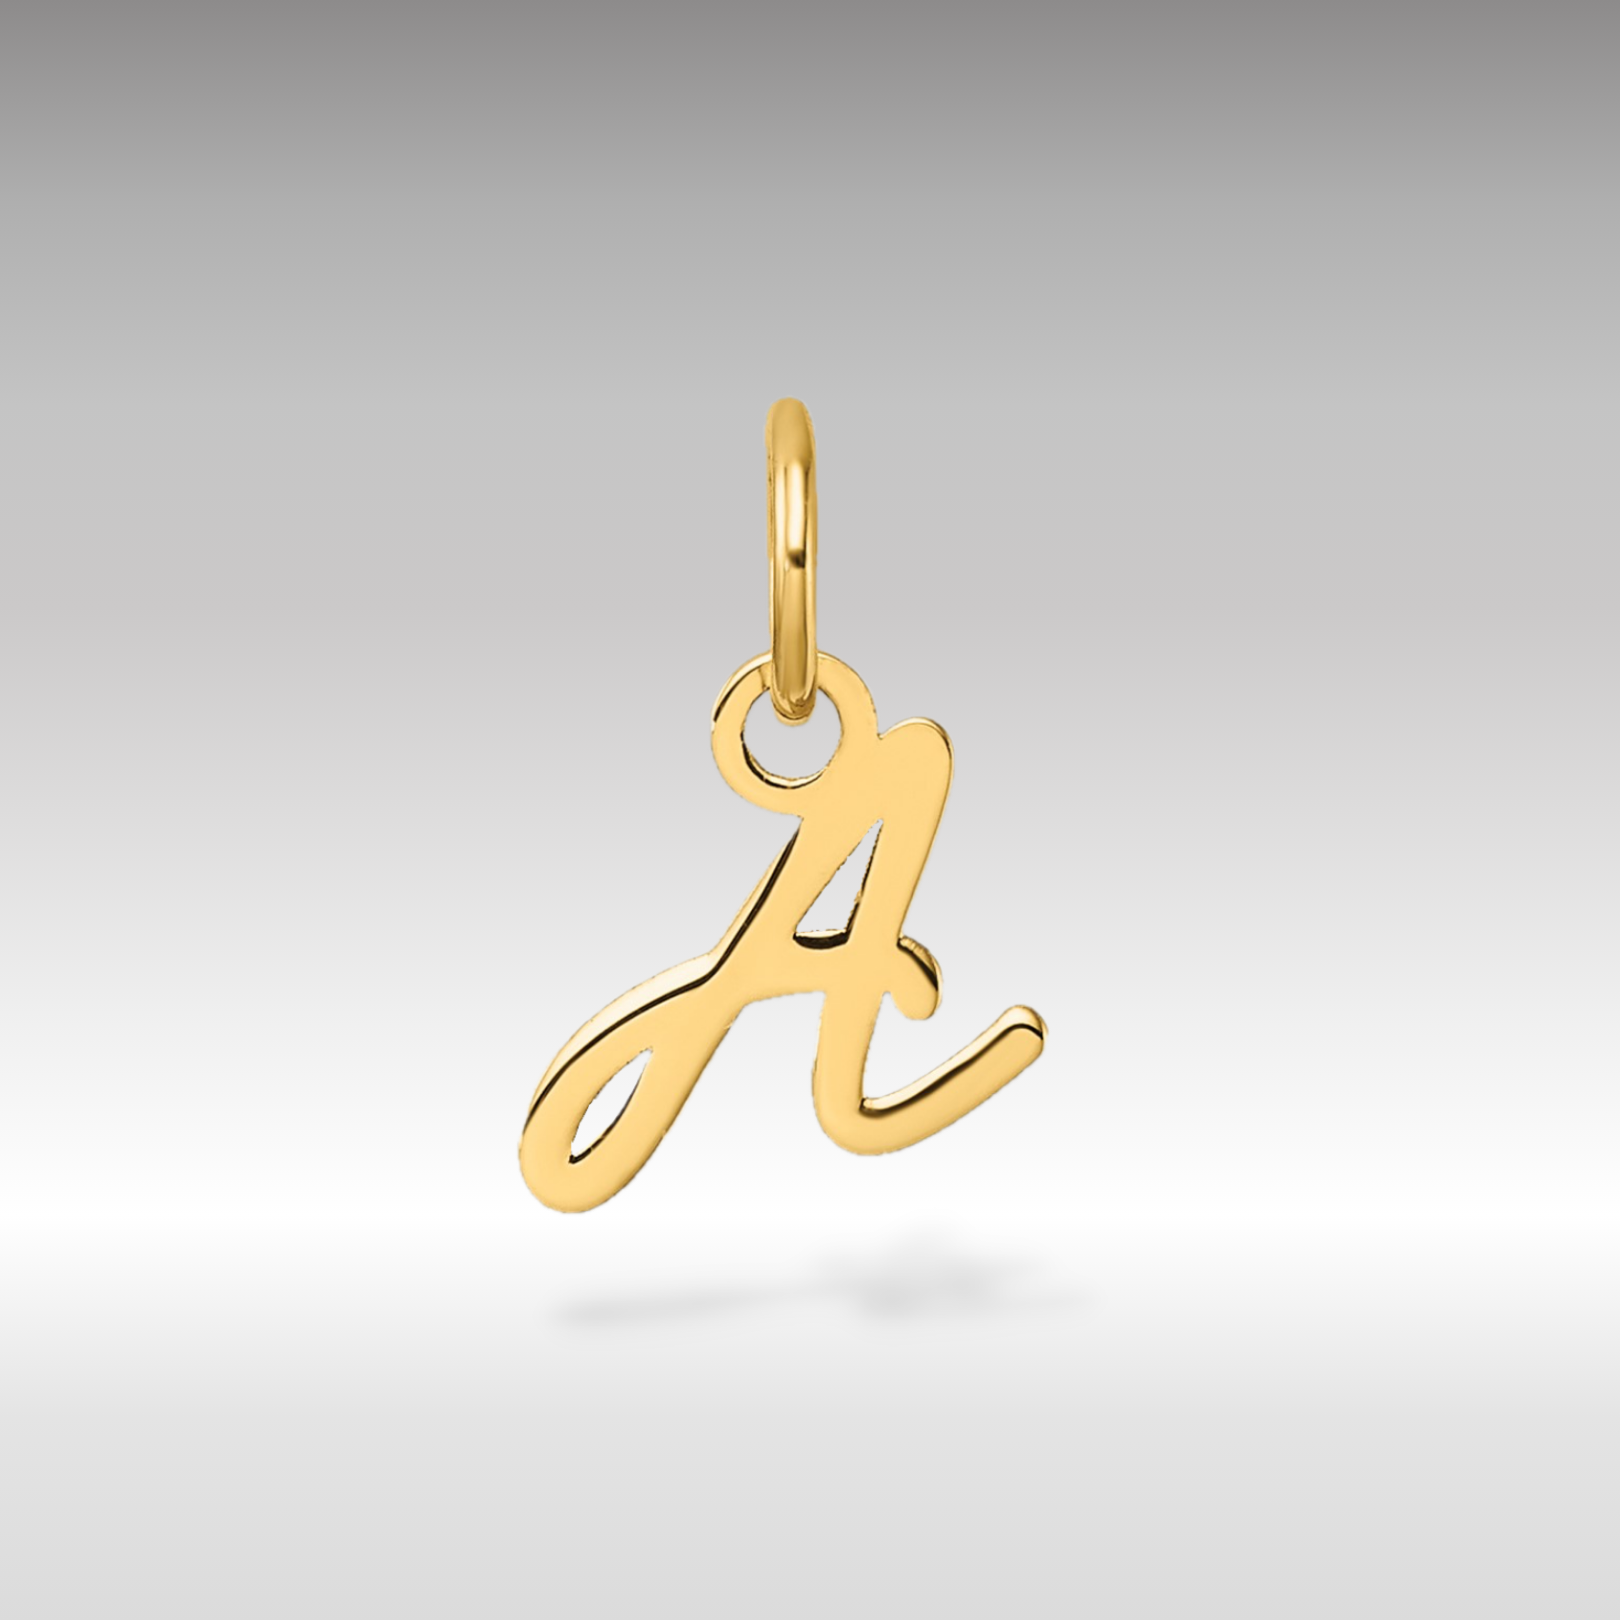 14K Gold Small Script Letter "A" Initial Pendant - Charlie & Co. Jewelry